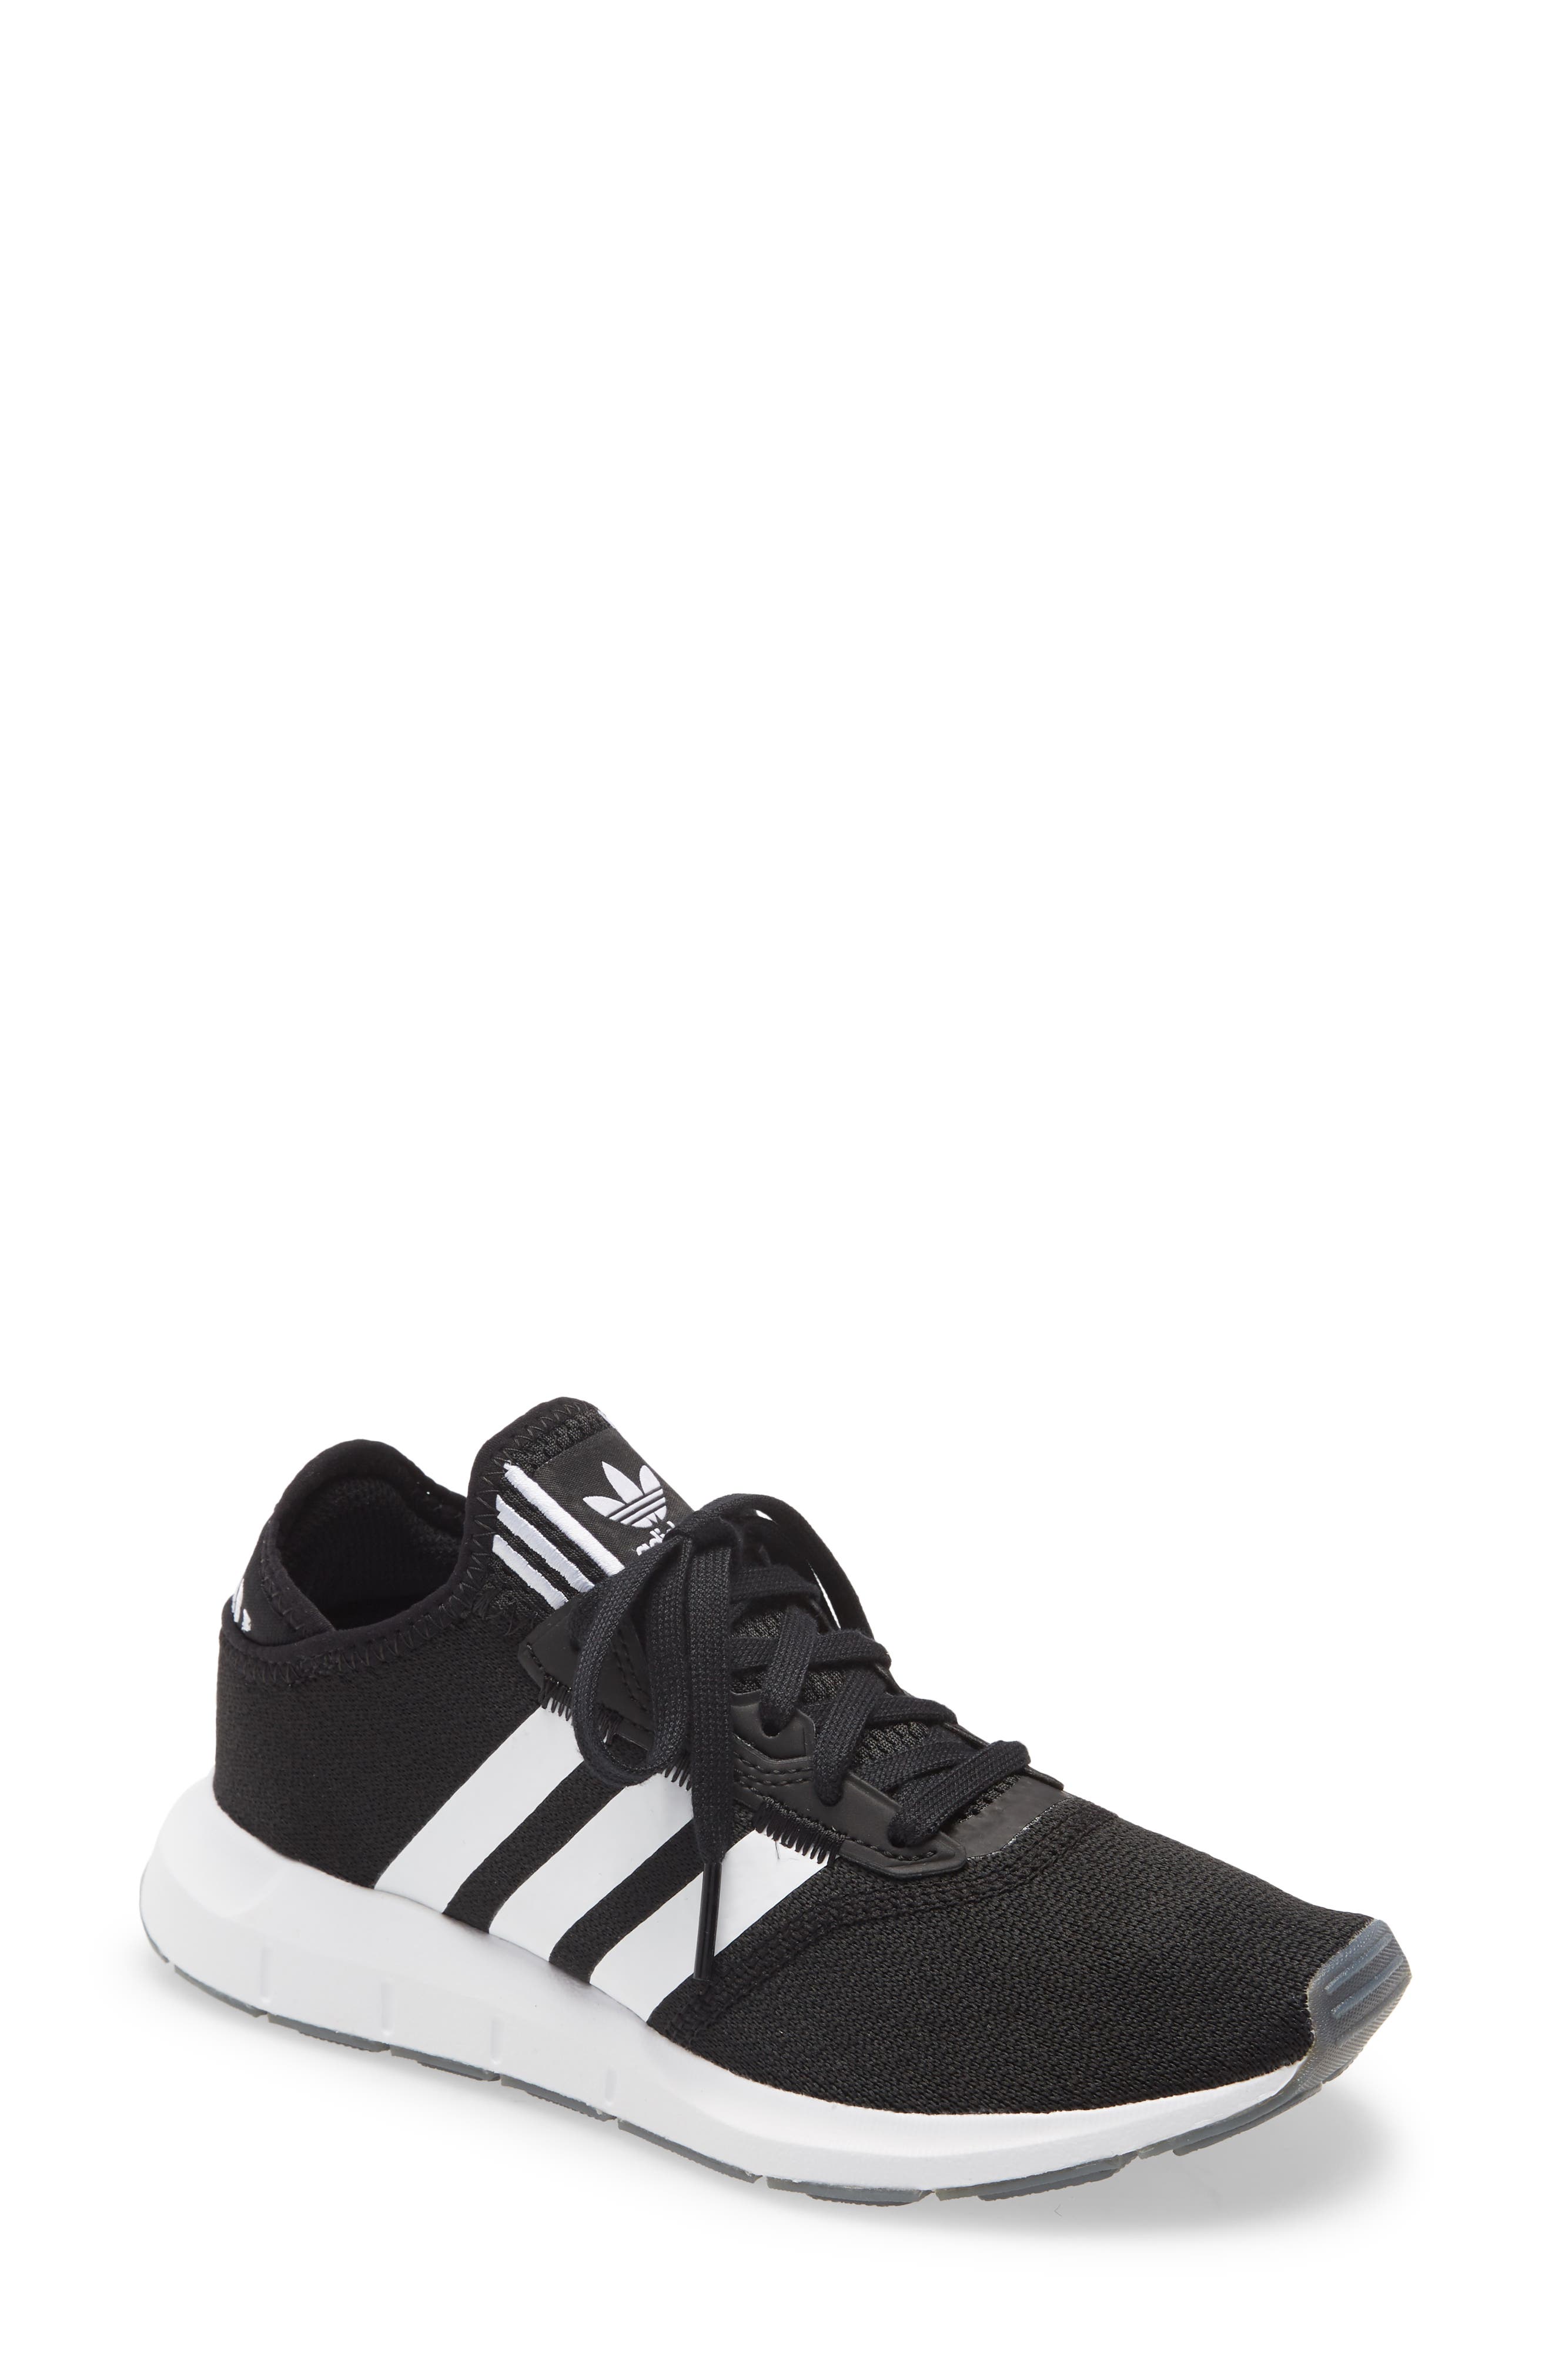 adidas womens shoes with fur